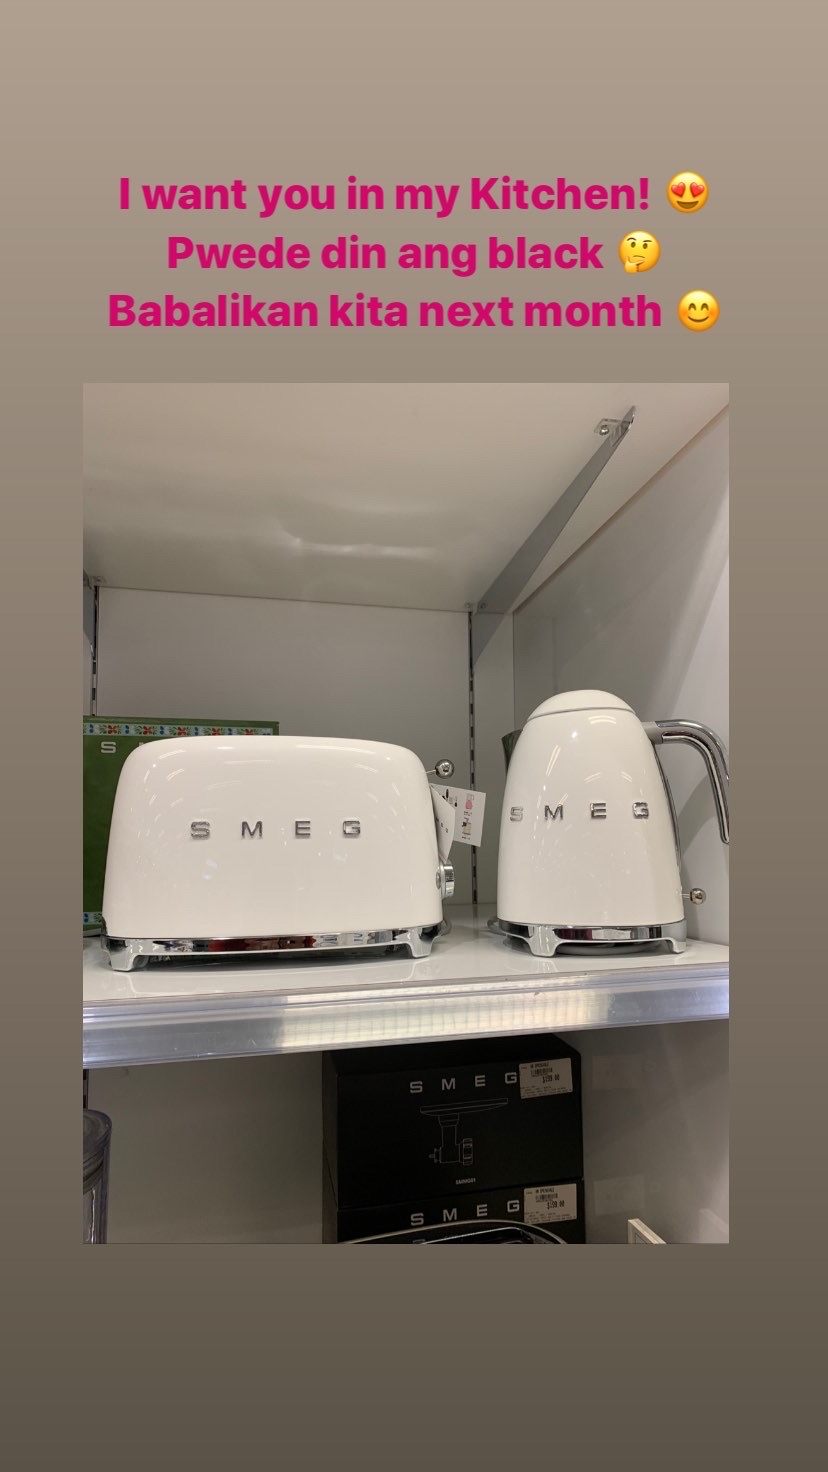 Smeg Kettle and Hot water